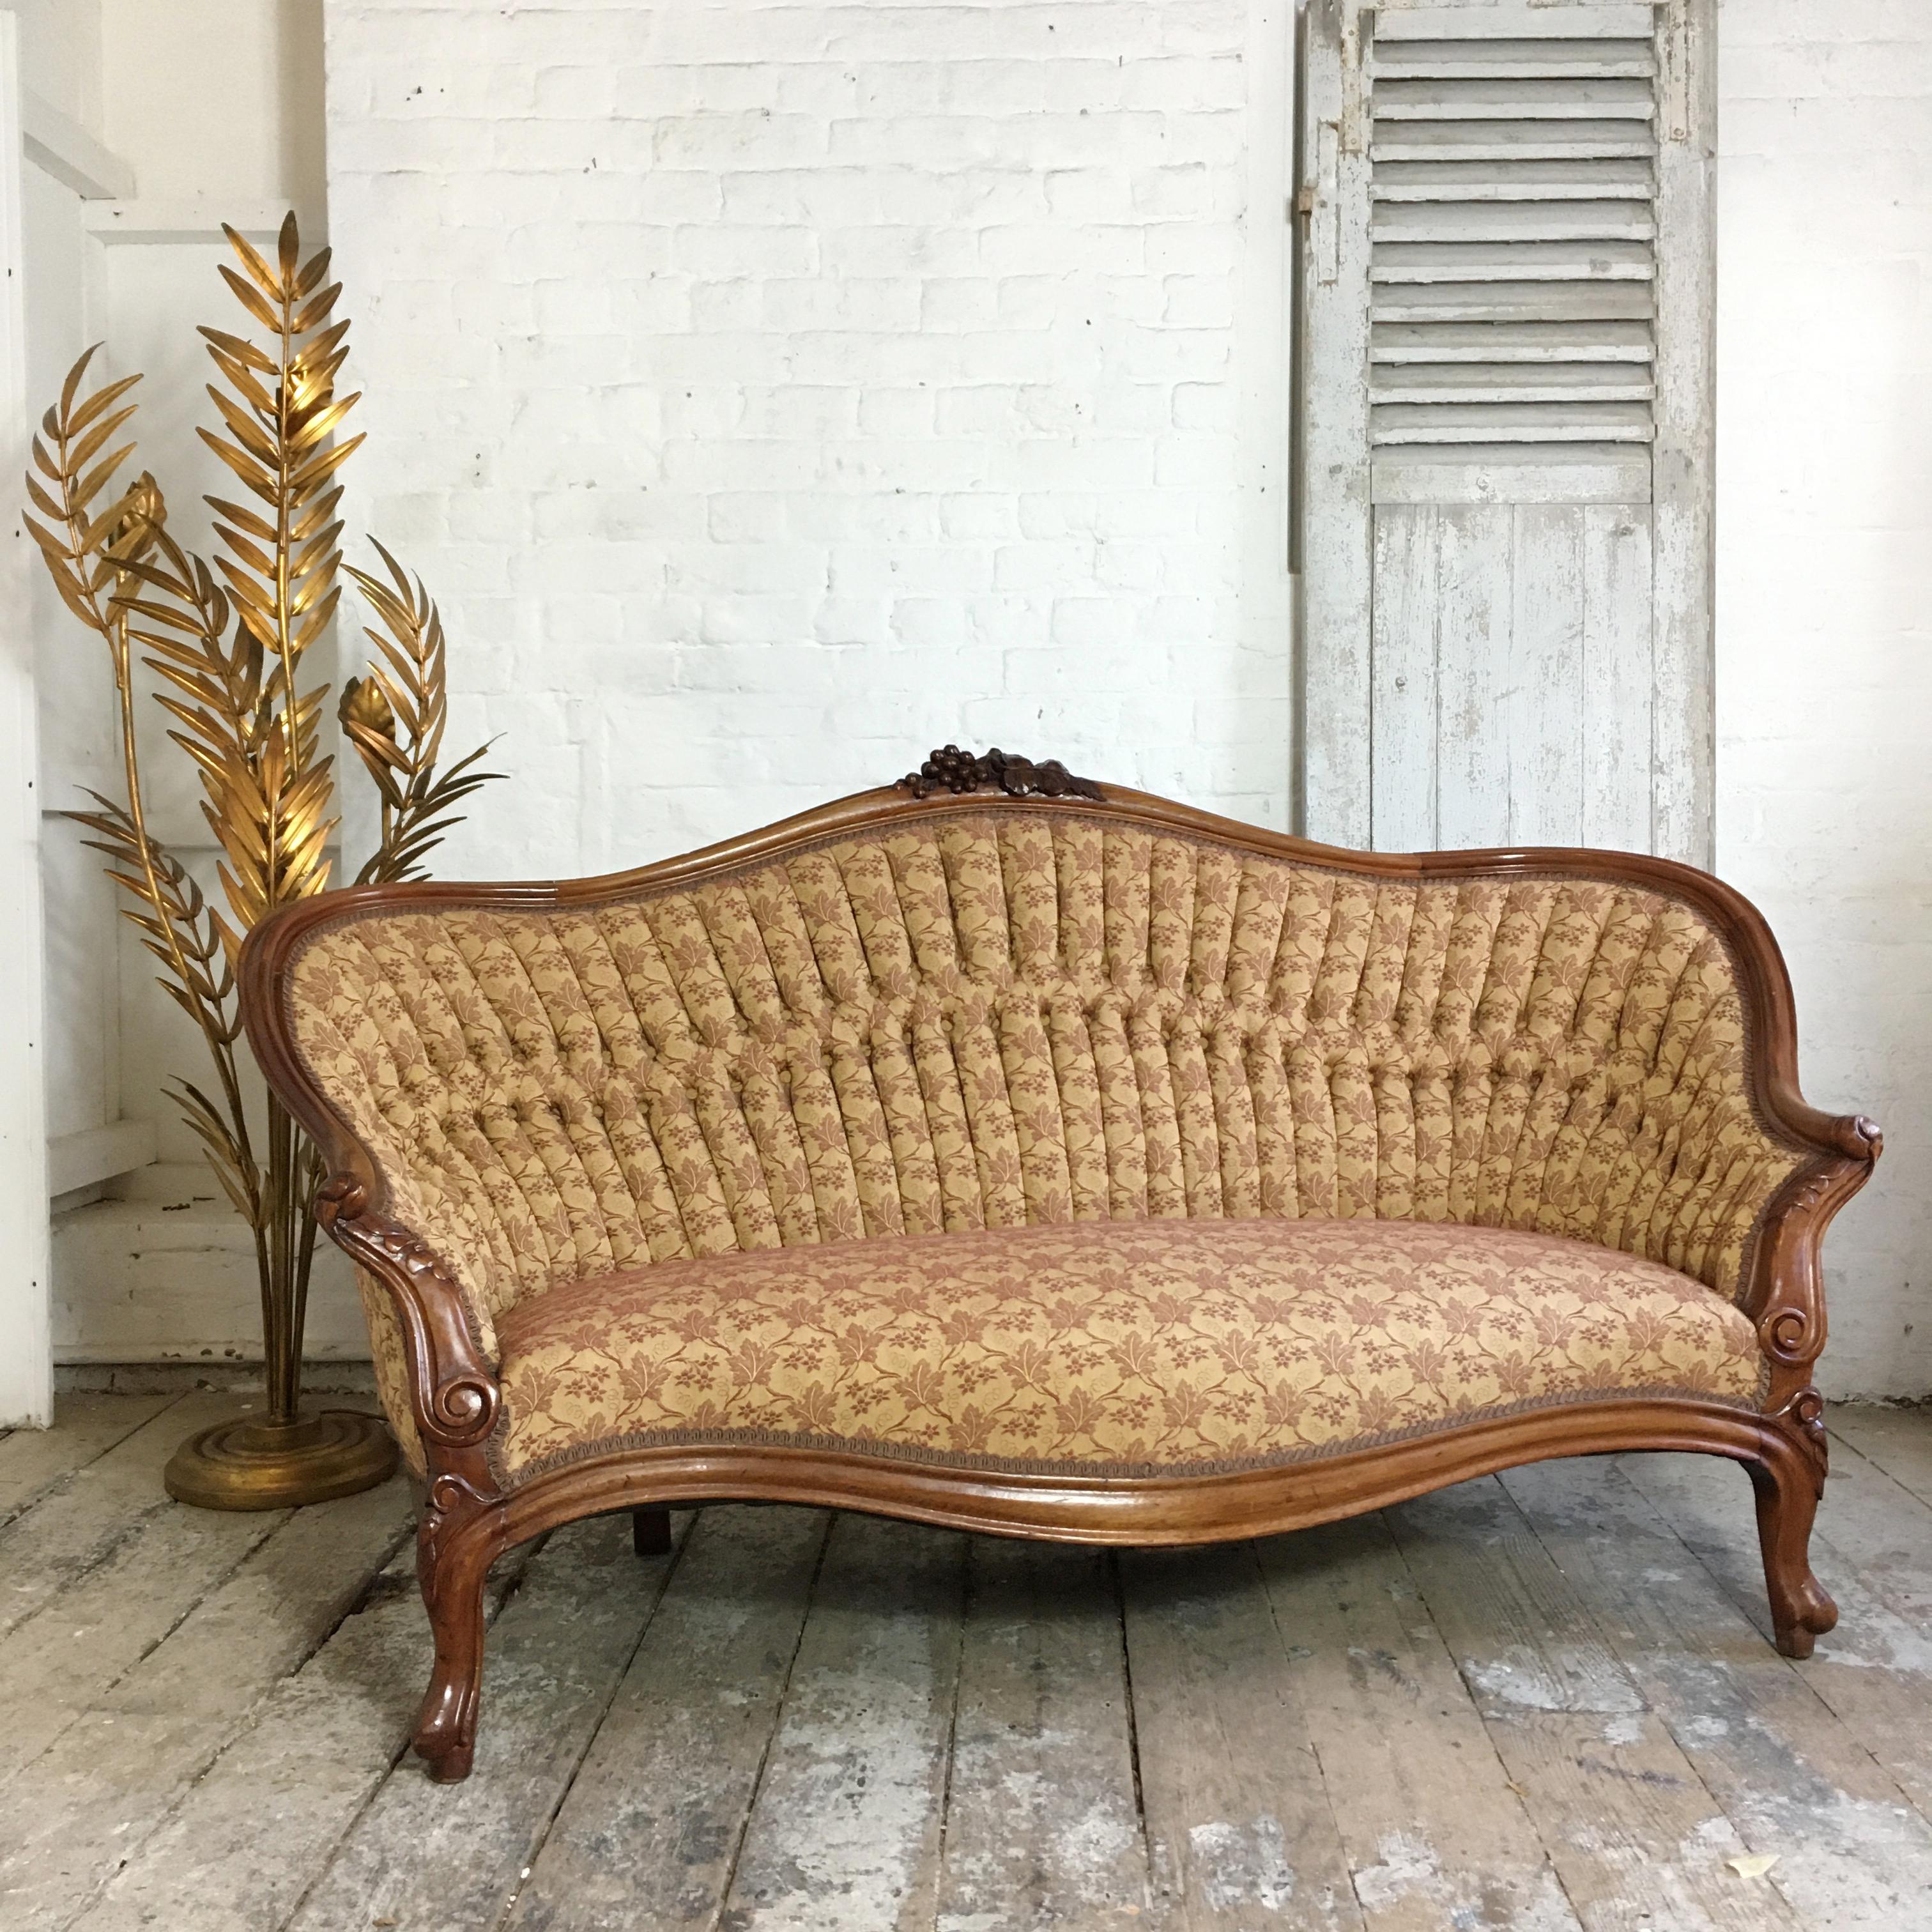 Antique French walnut settee, circa 1890s, cabriolet legs, double pleated buttoned back, upholstered in a soft gold beige jacquard with grape design woven through, this Grape design matches back to the carved grape and leaf crest on the top of the